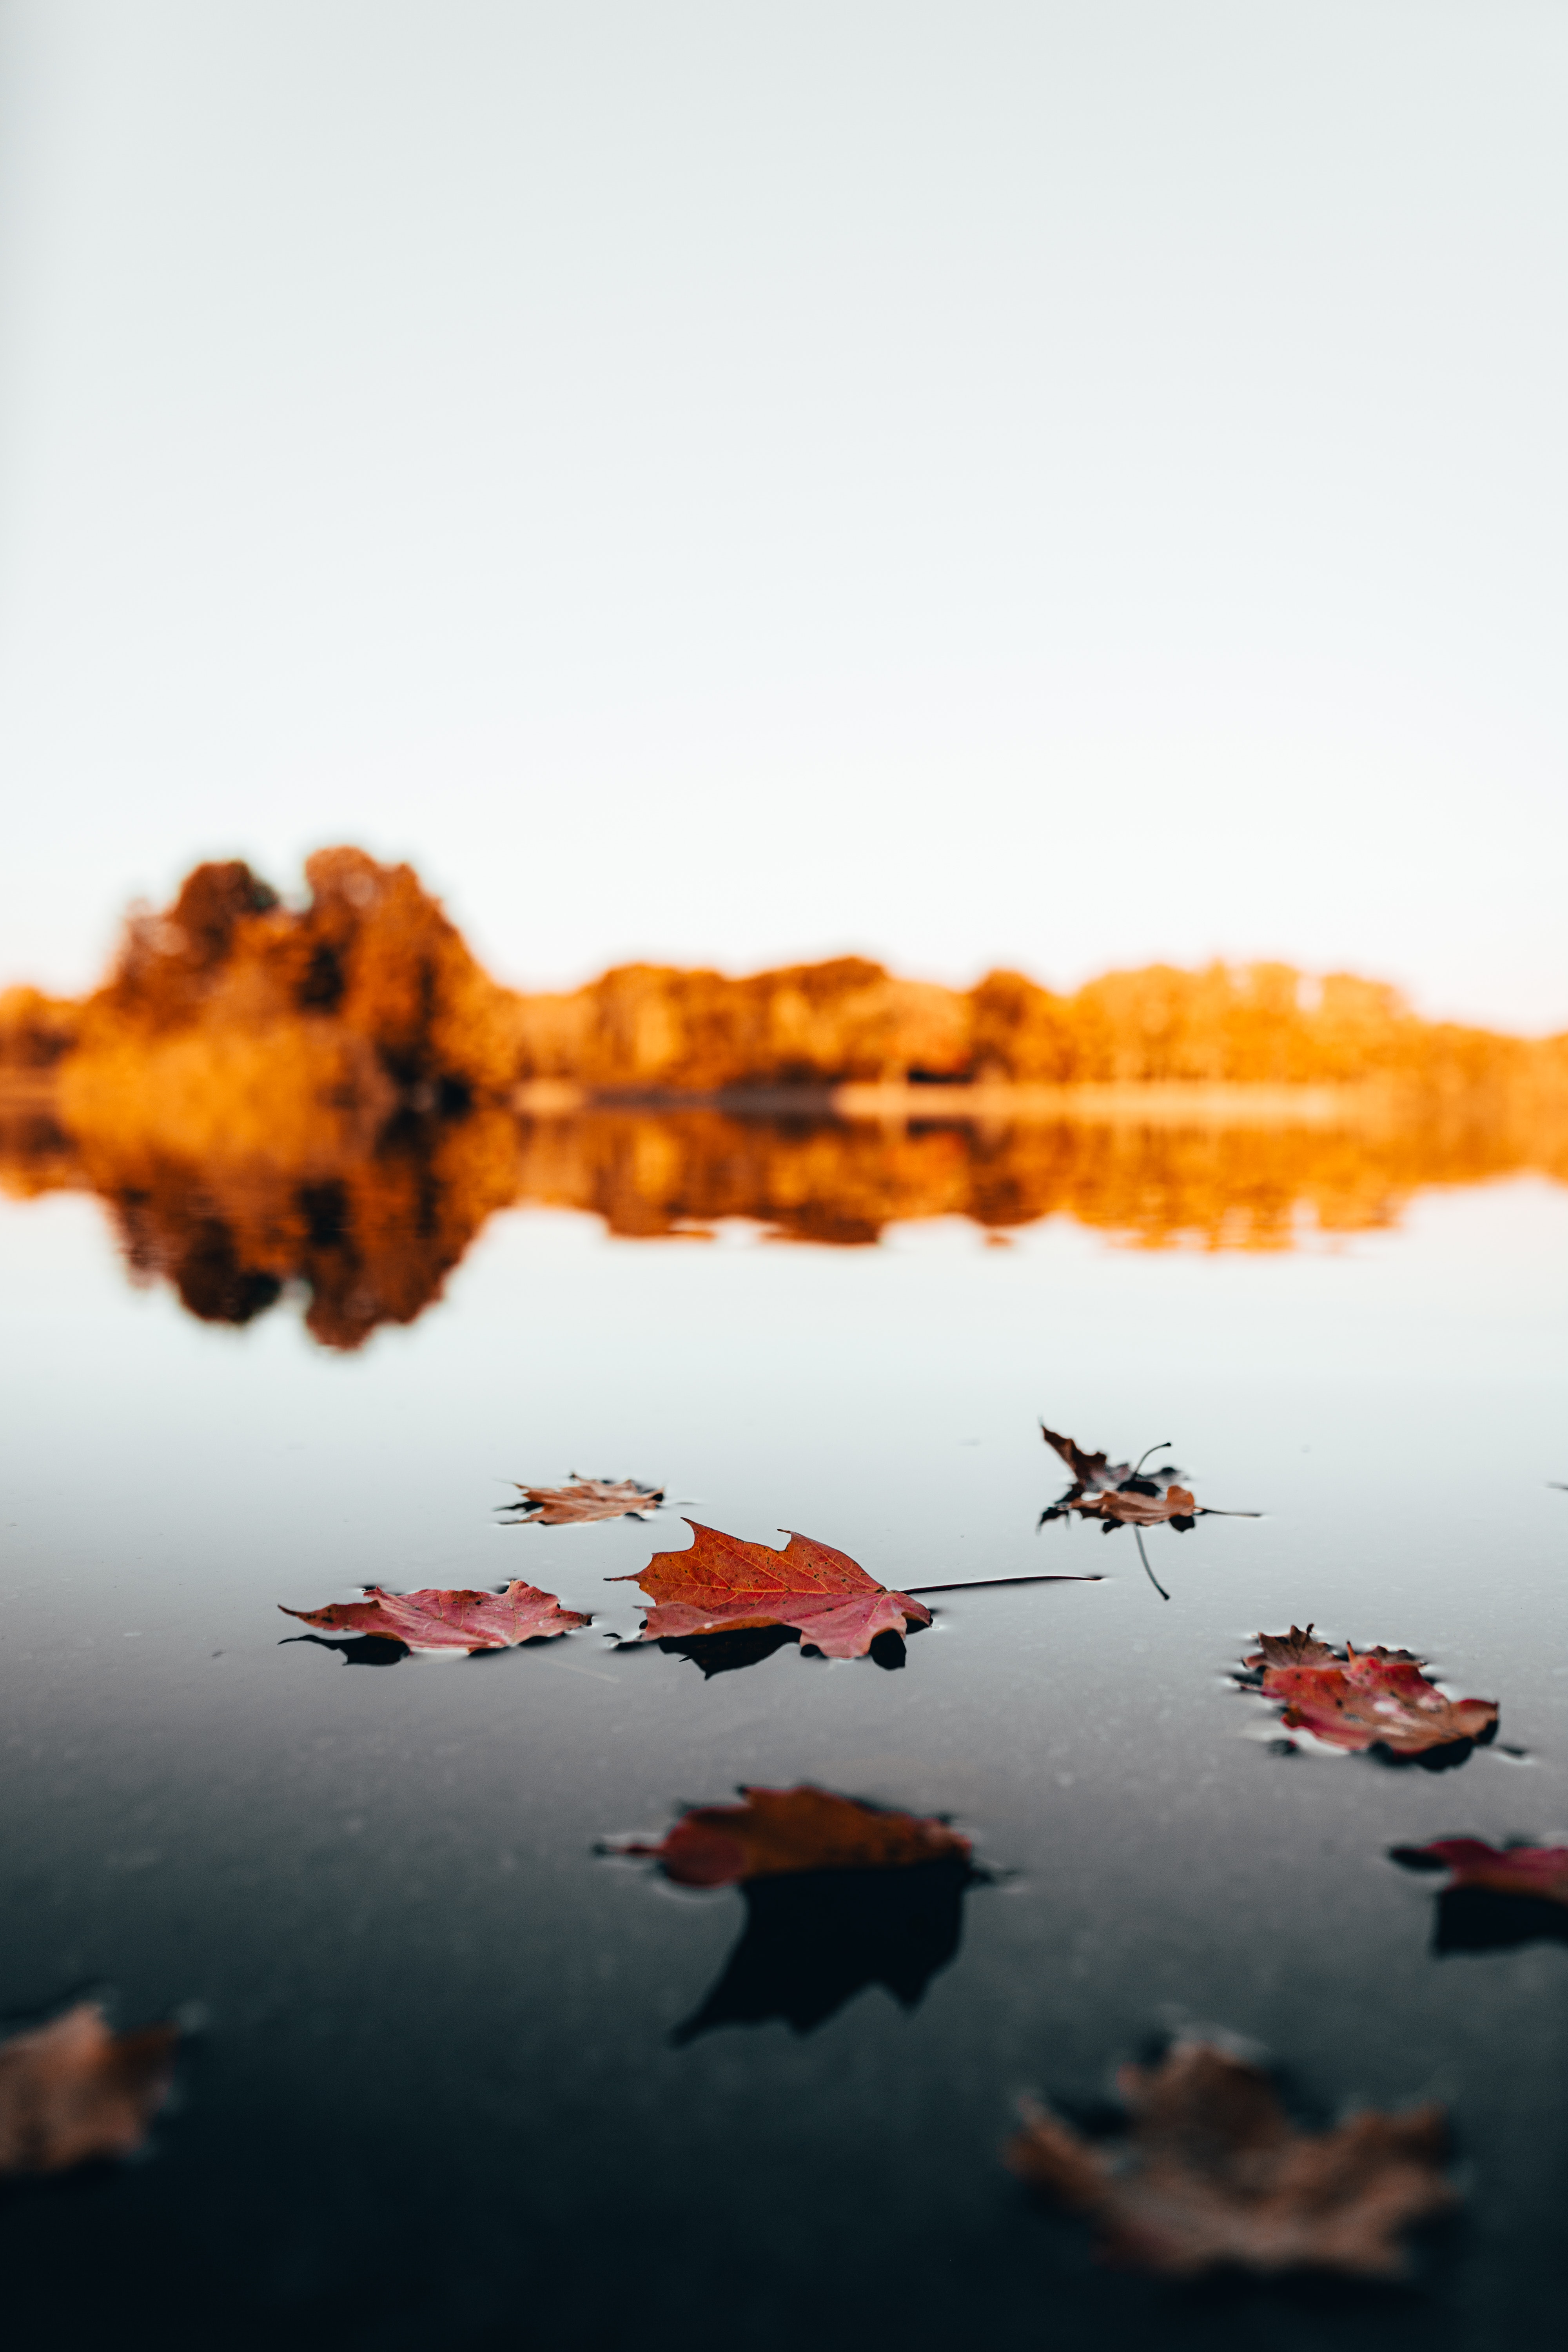 Autumn leaves floating on water. │Source: Pexels